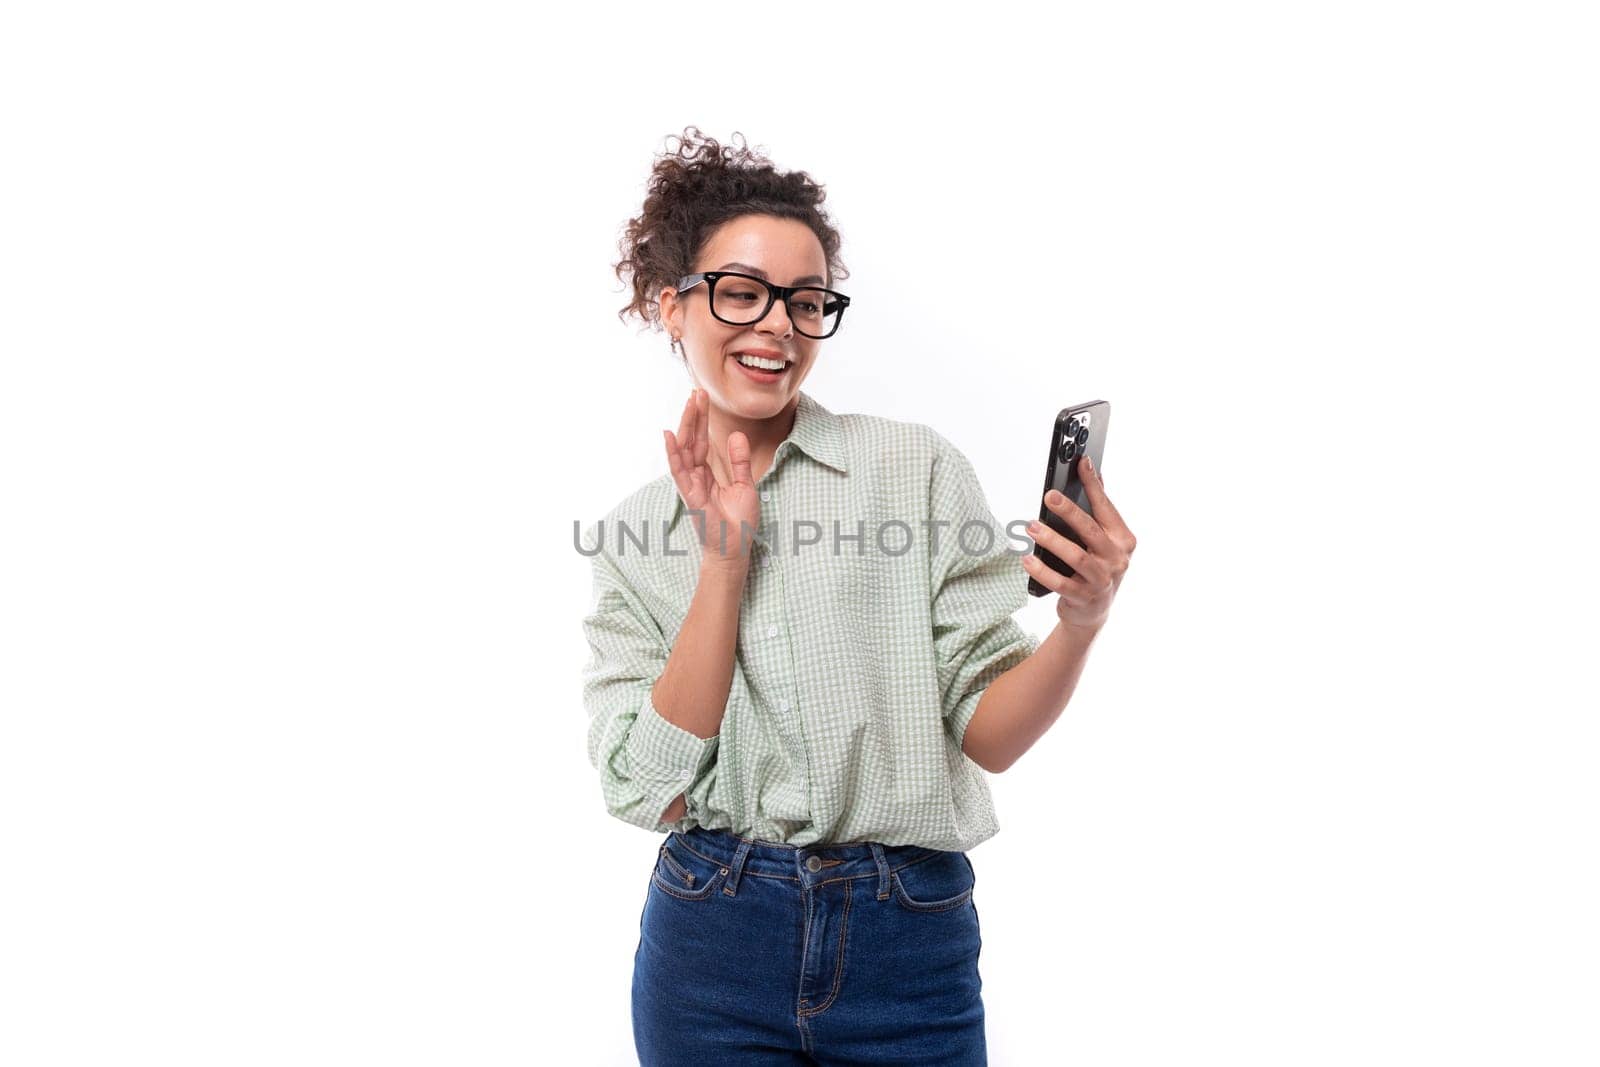 young smiling woman student with curly hair in a shirt communicates via video call on the phone.